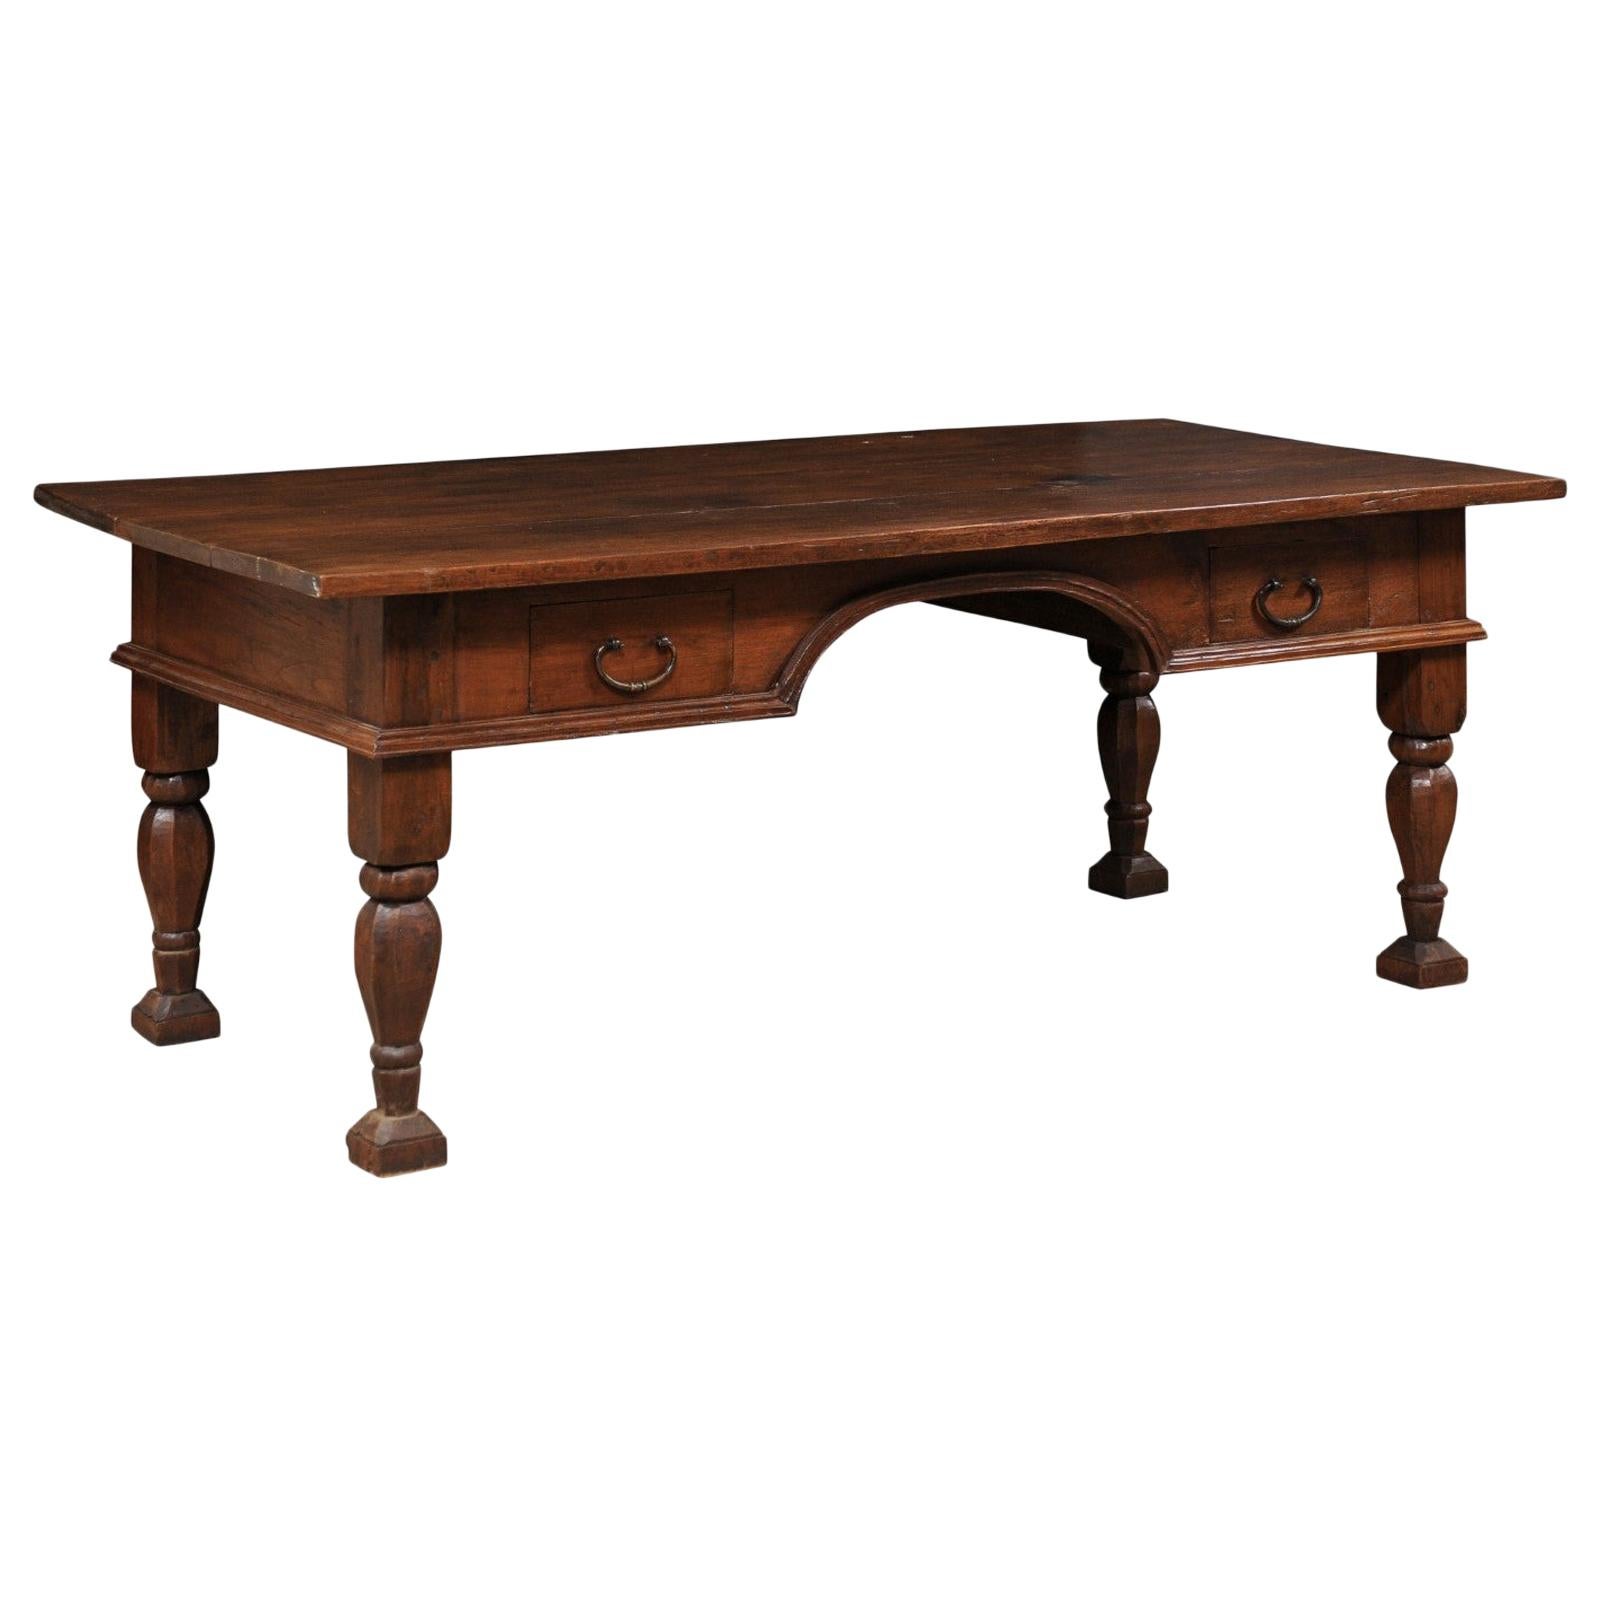 Large Brazilian Peroba Wood Executive Desk with Robustly-Carved Baluster Legs For Sale